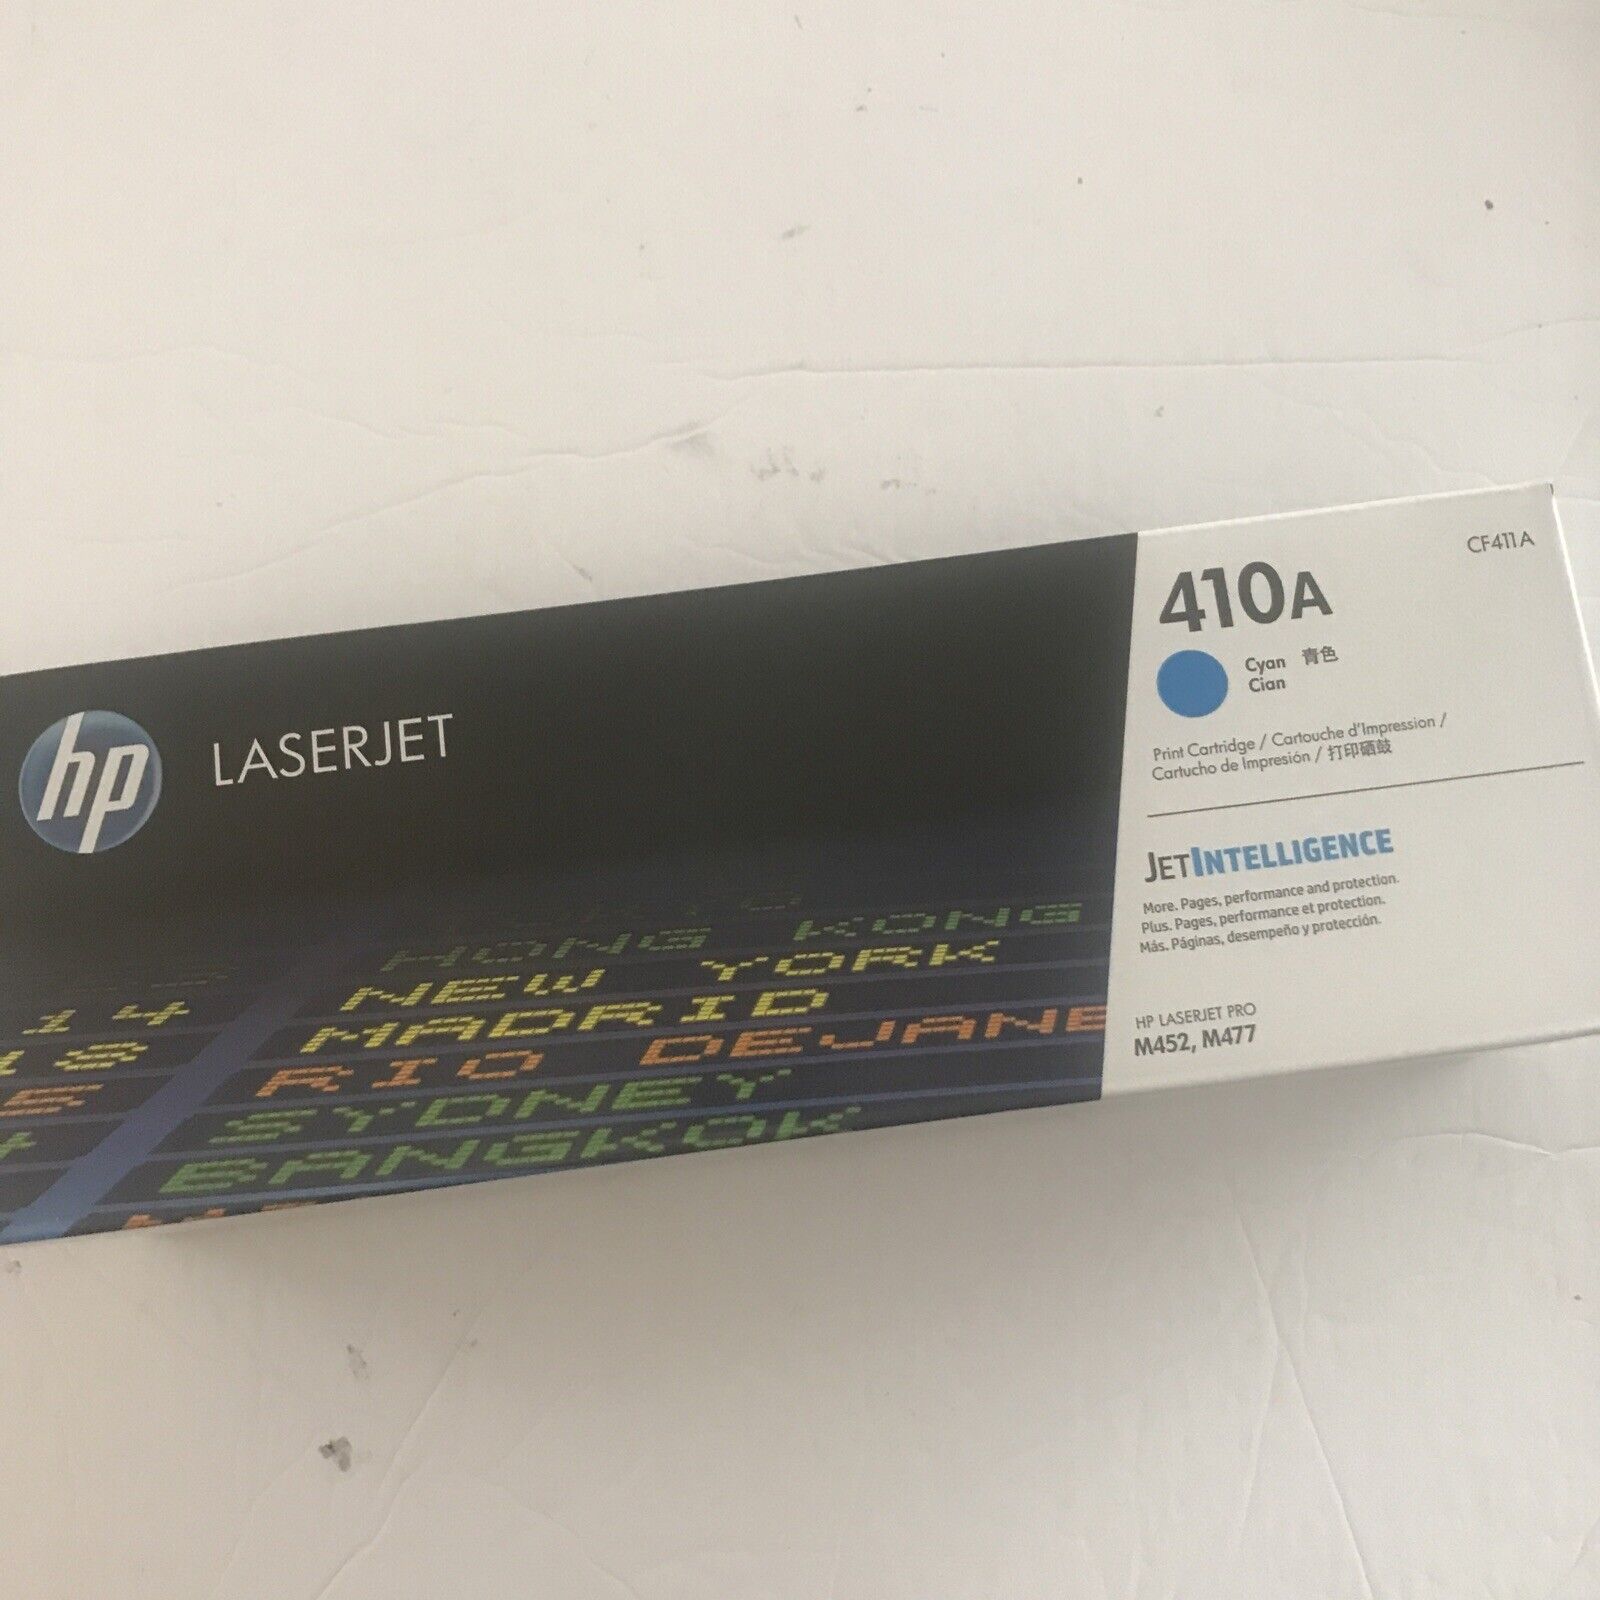 HP LASERJET 410A CF411A CYAN BLUE INK EXPIRED 2021 NEW UNOPENED SEALED